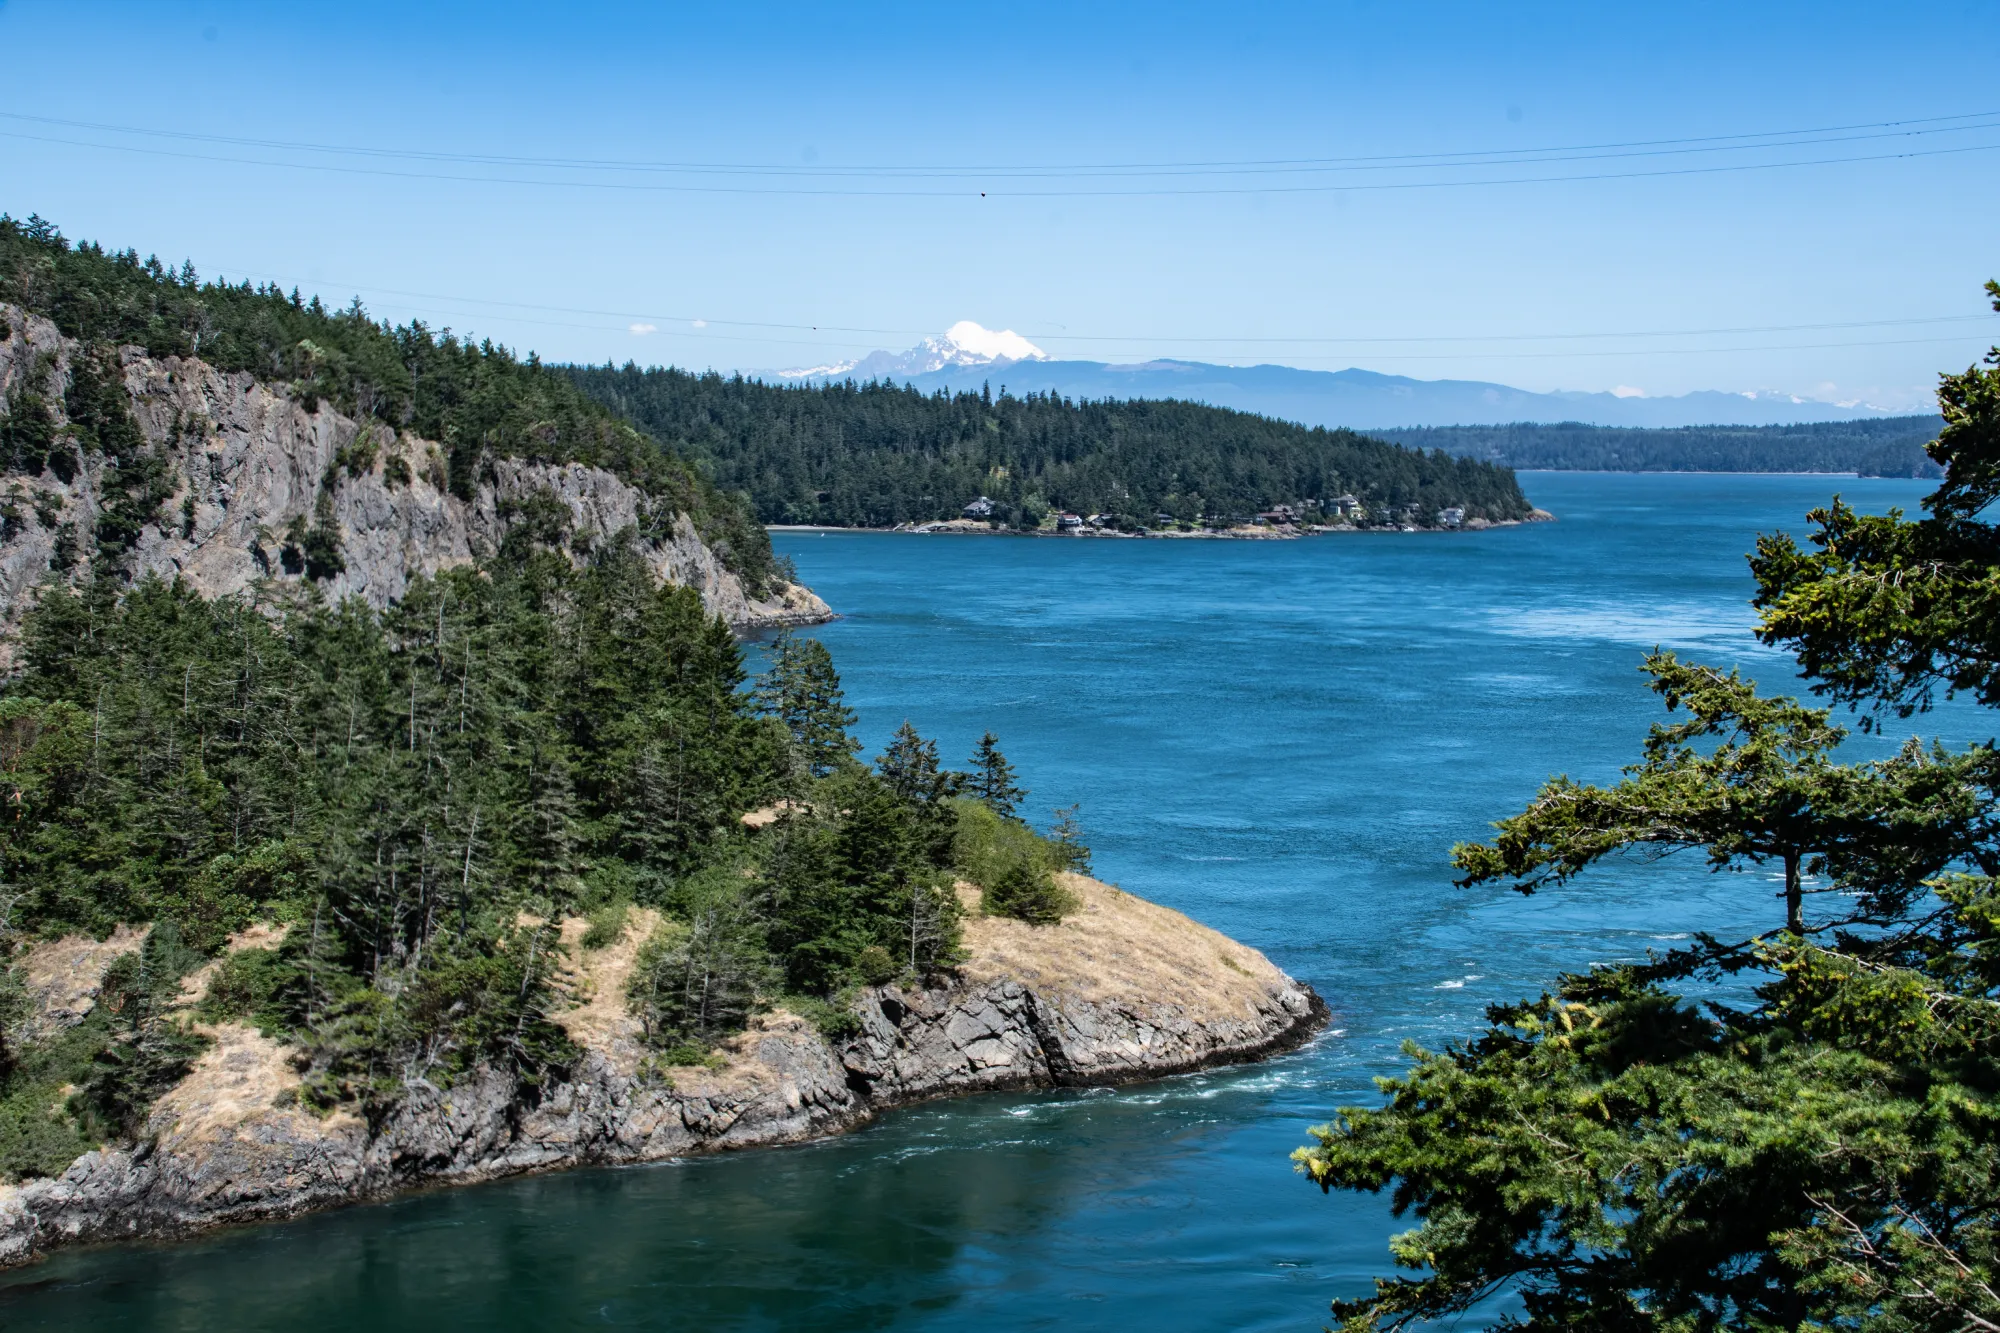 A photo of Whidbey Island taken from Deception Pass bridge